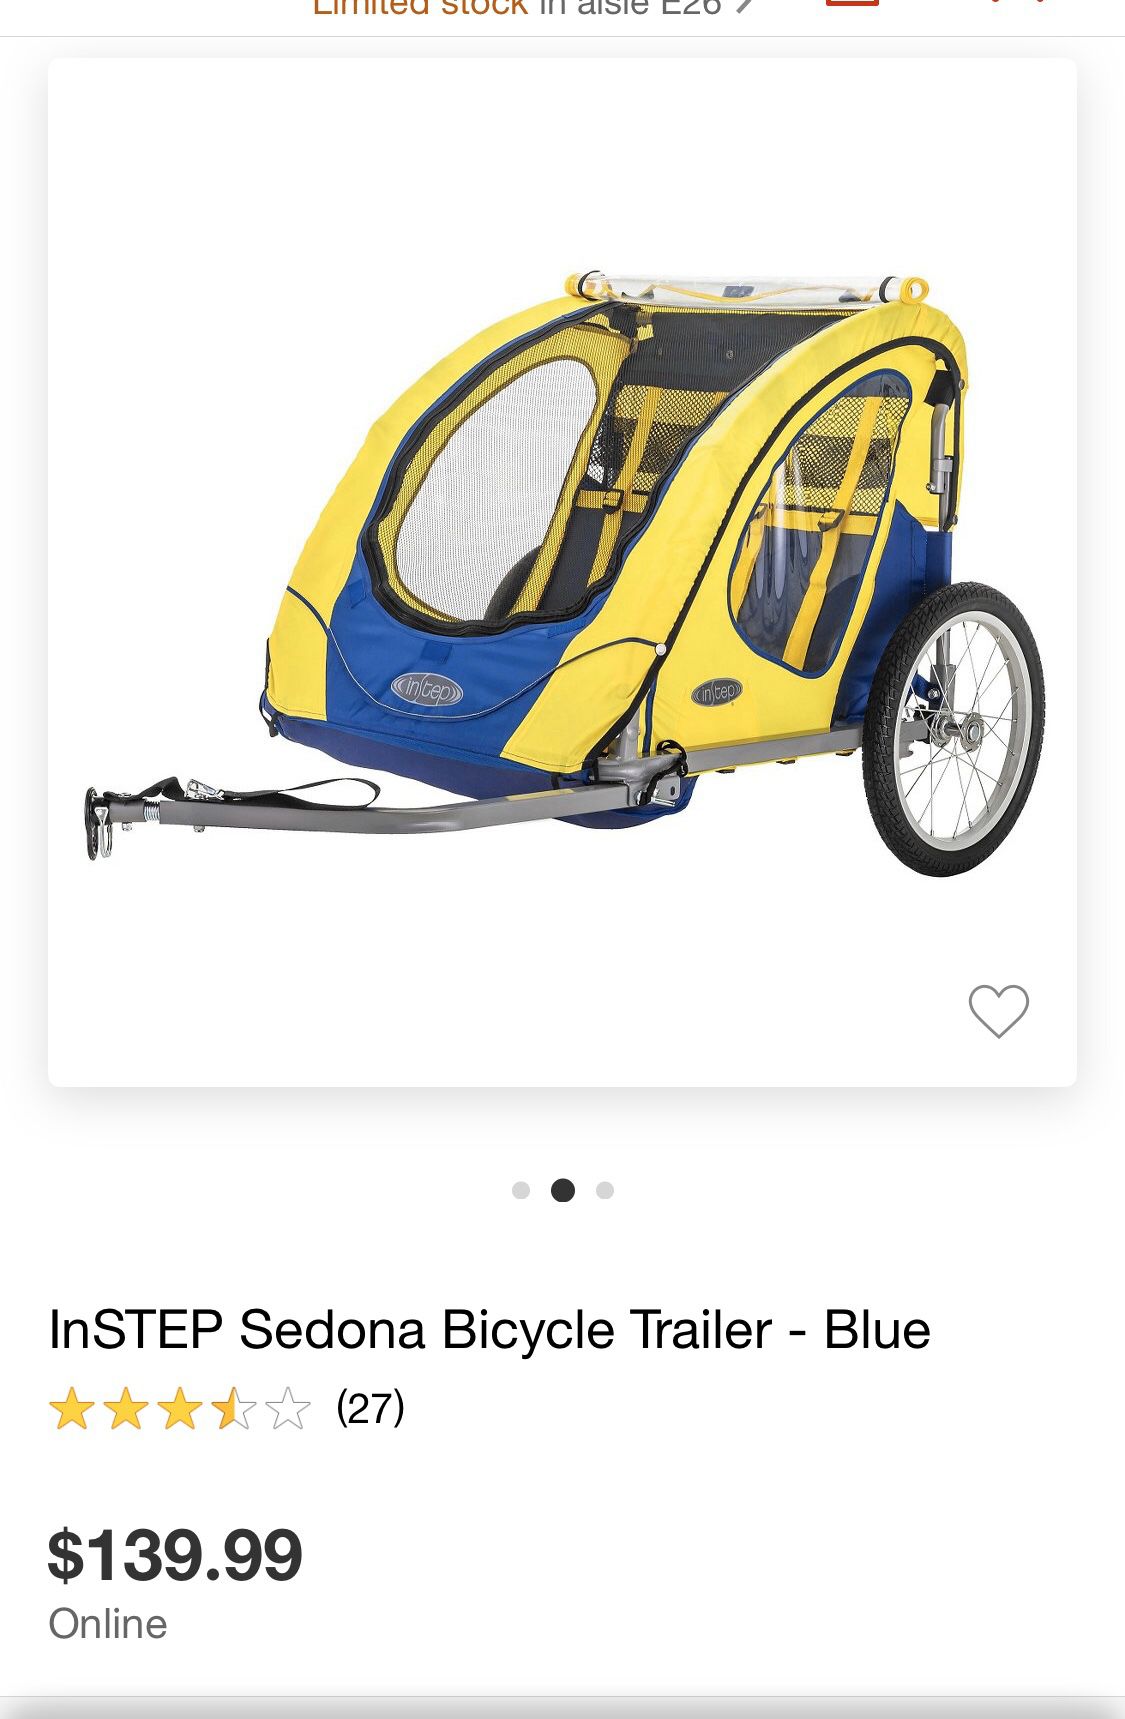 Bike trailer for toddlers 2 seater